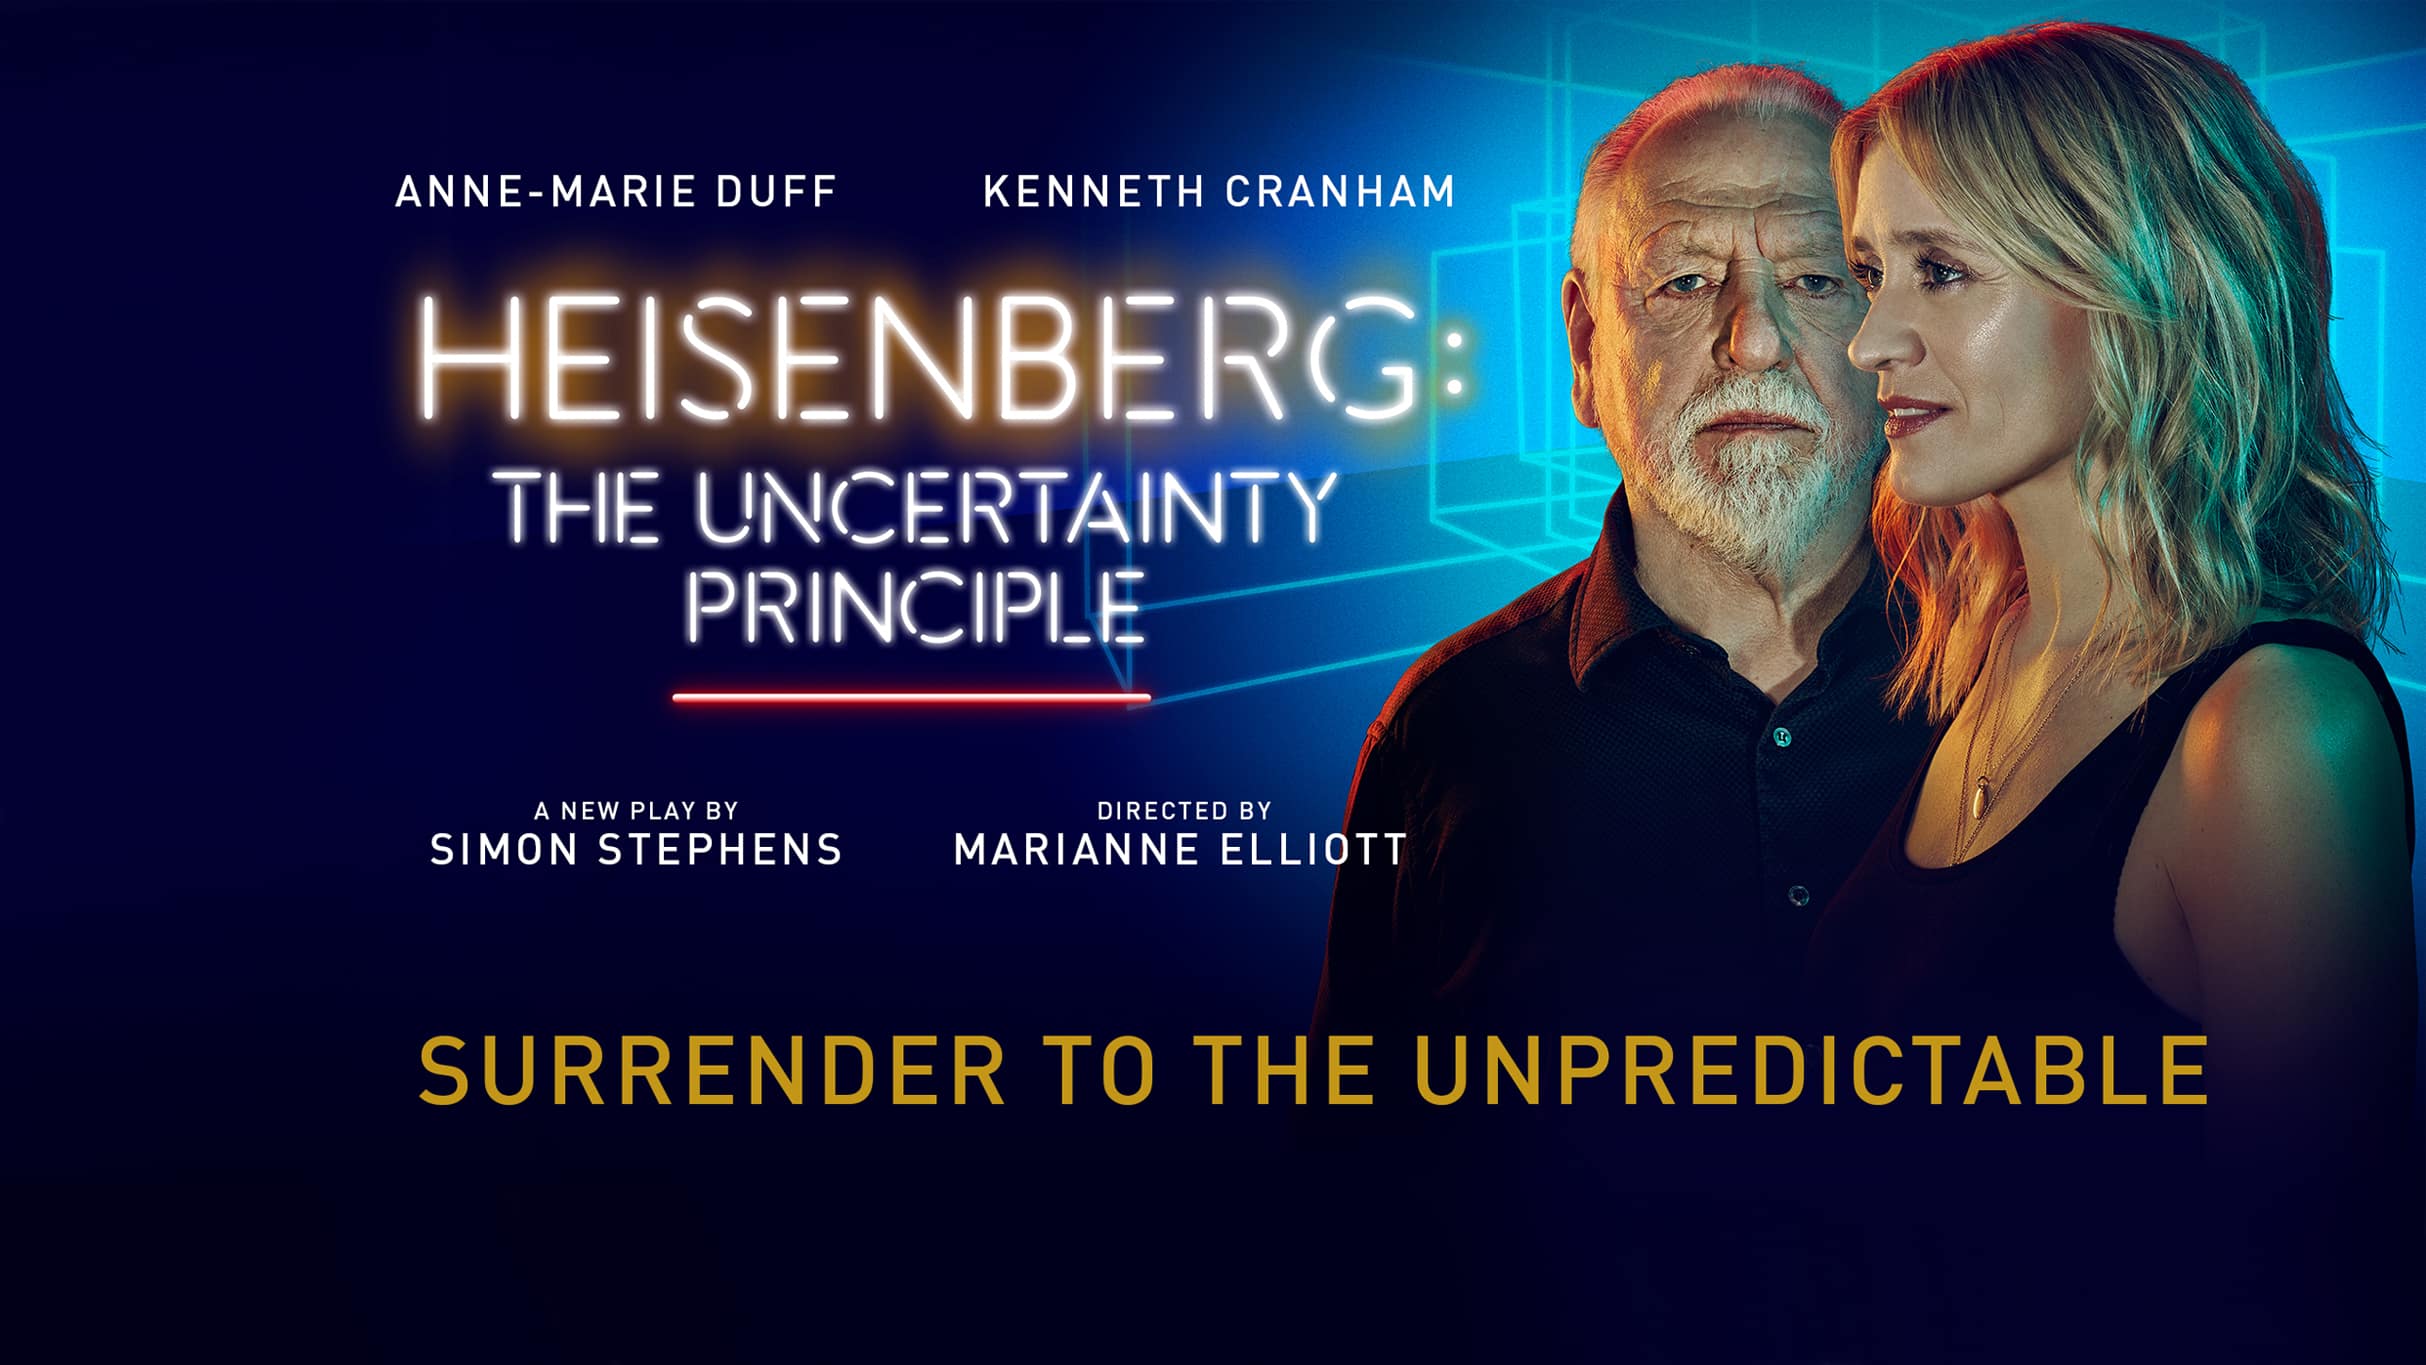 Heisenberg The Uncertainty Principle in production